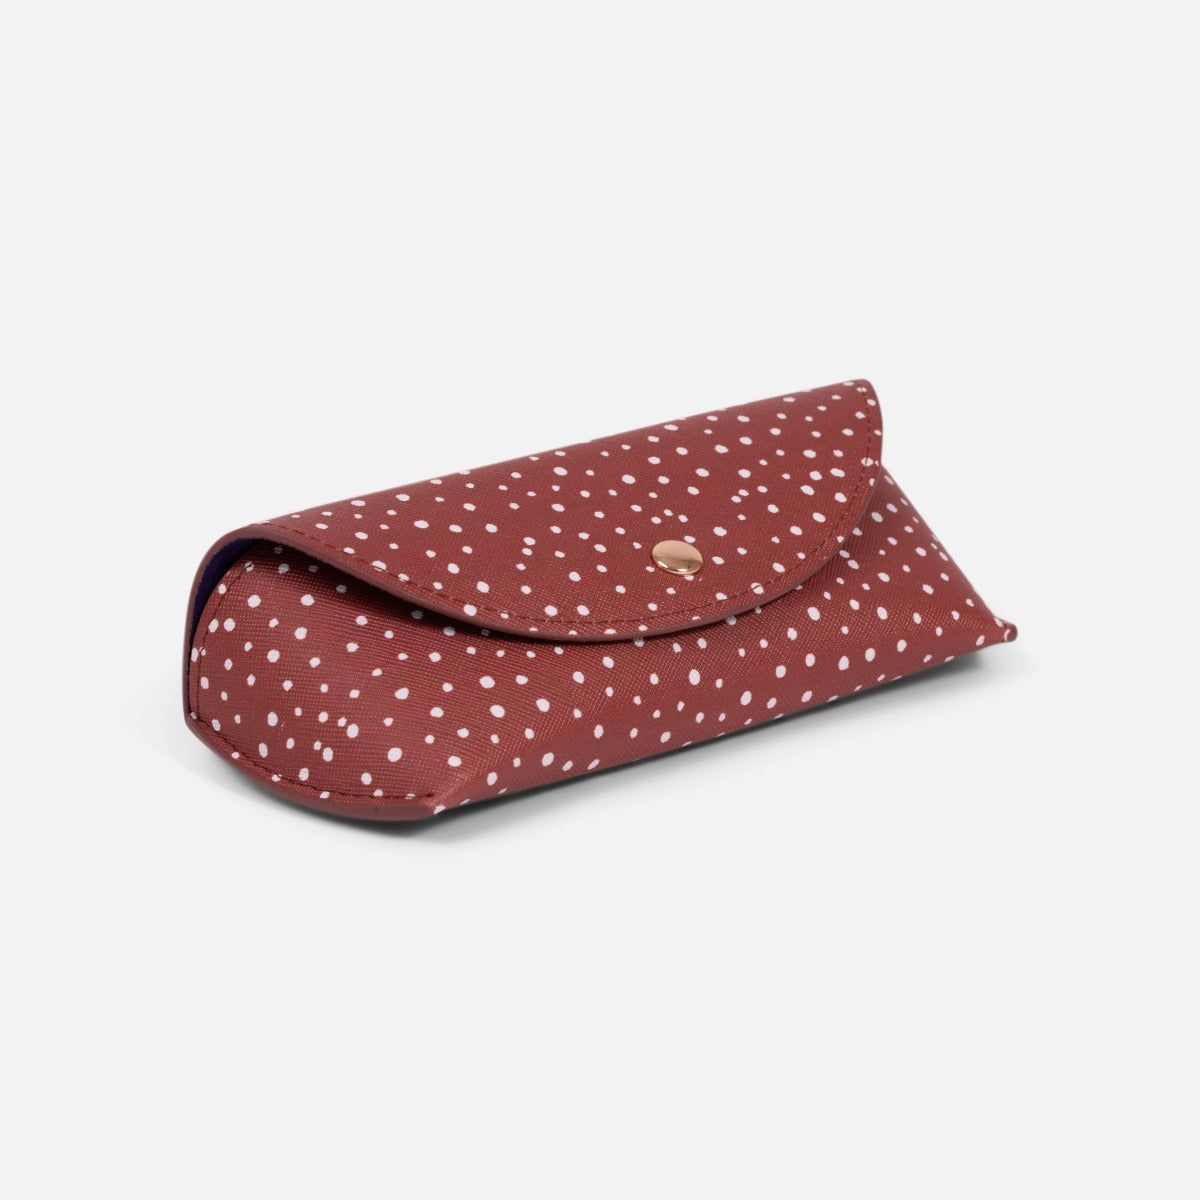 Rust glasses case with white dots   